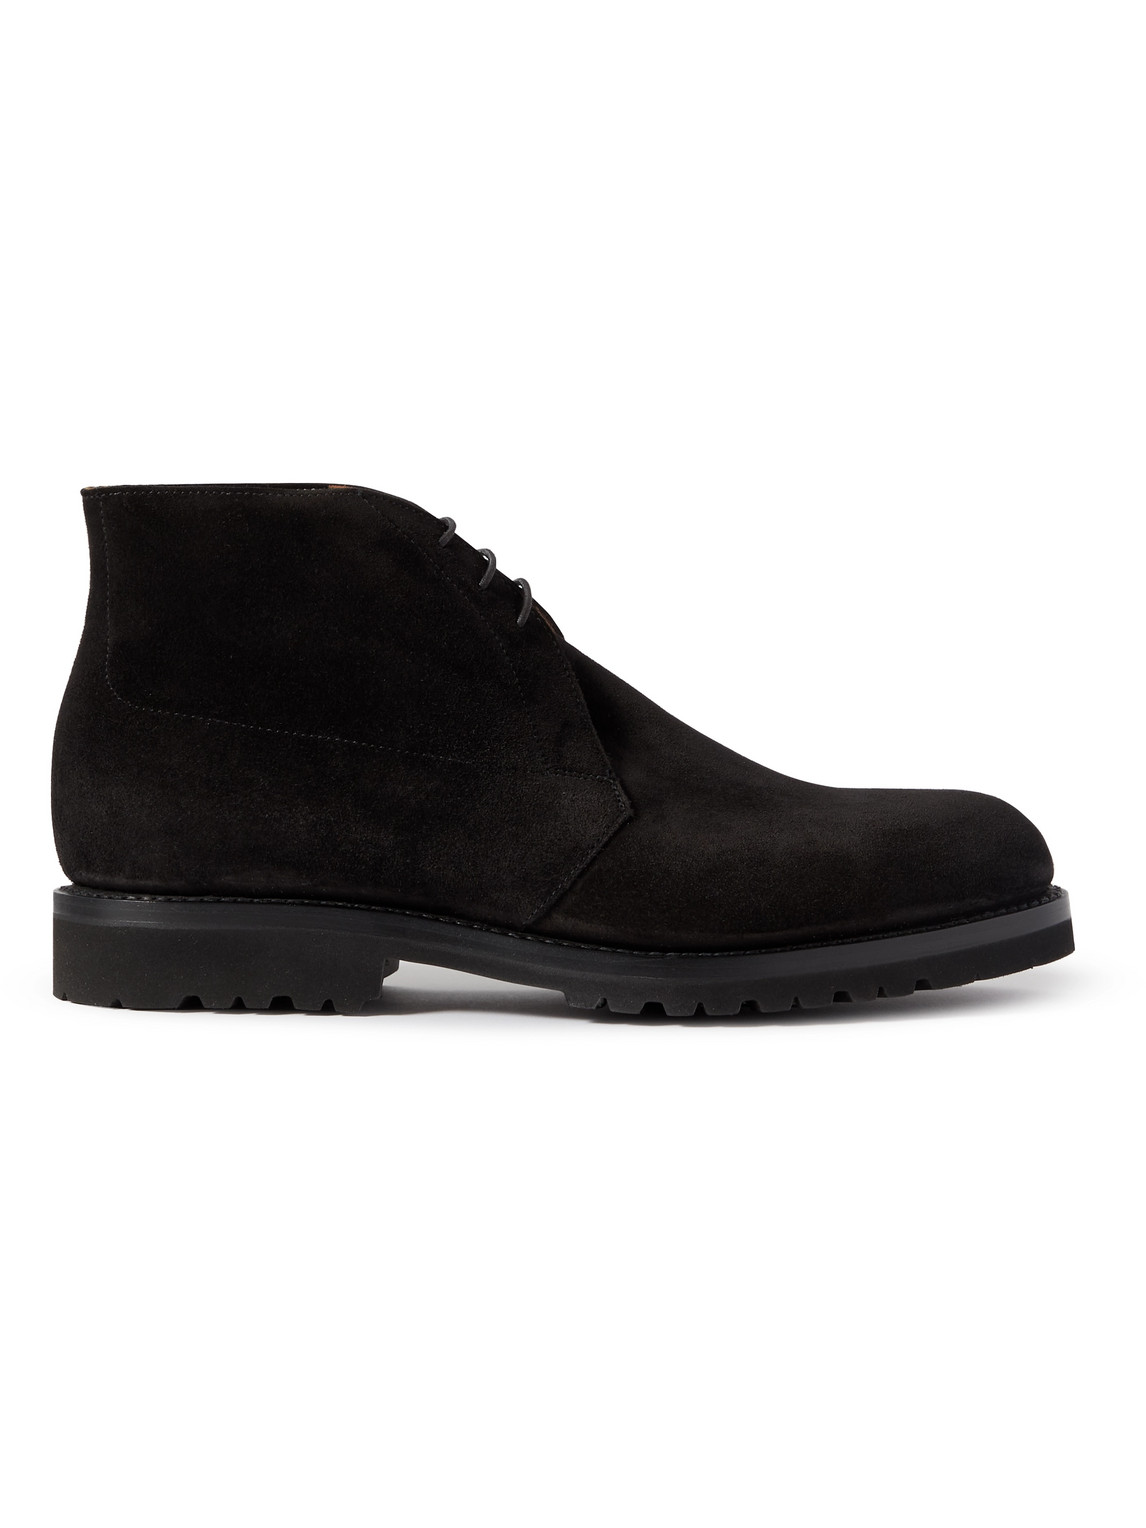 George Cleverley Nathan Suede Chukka Boots In Black